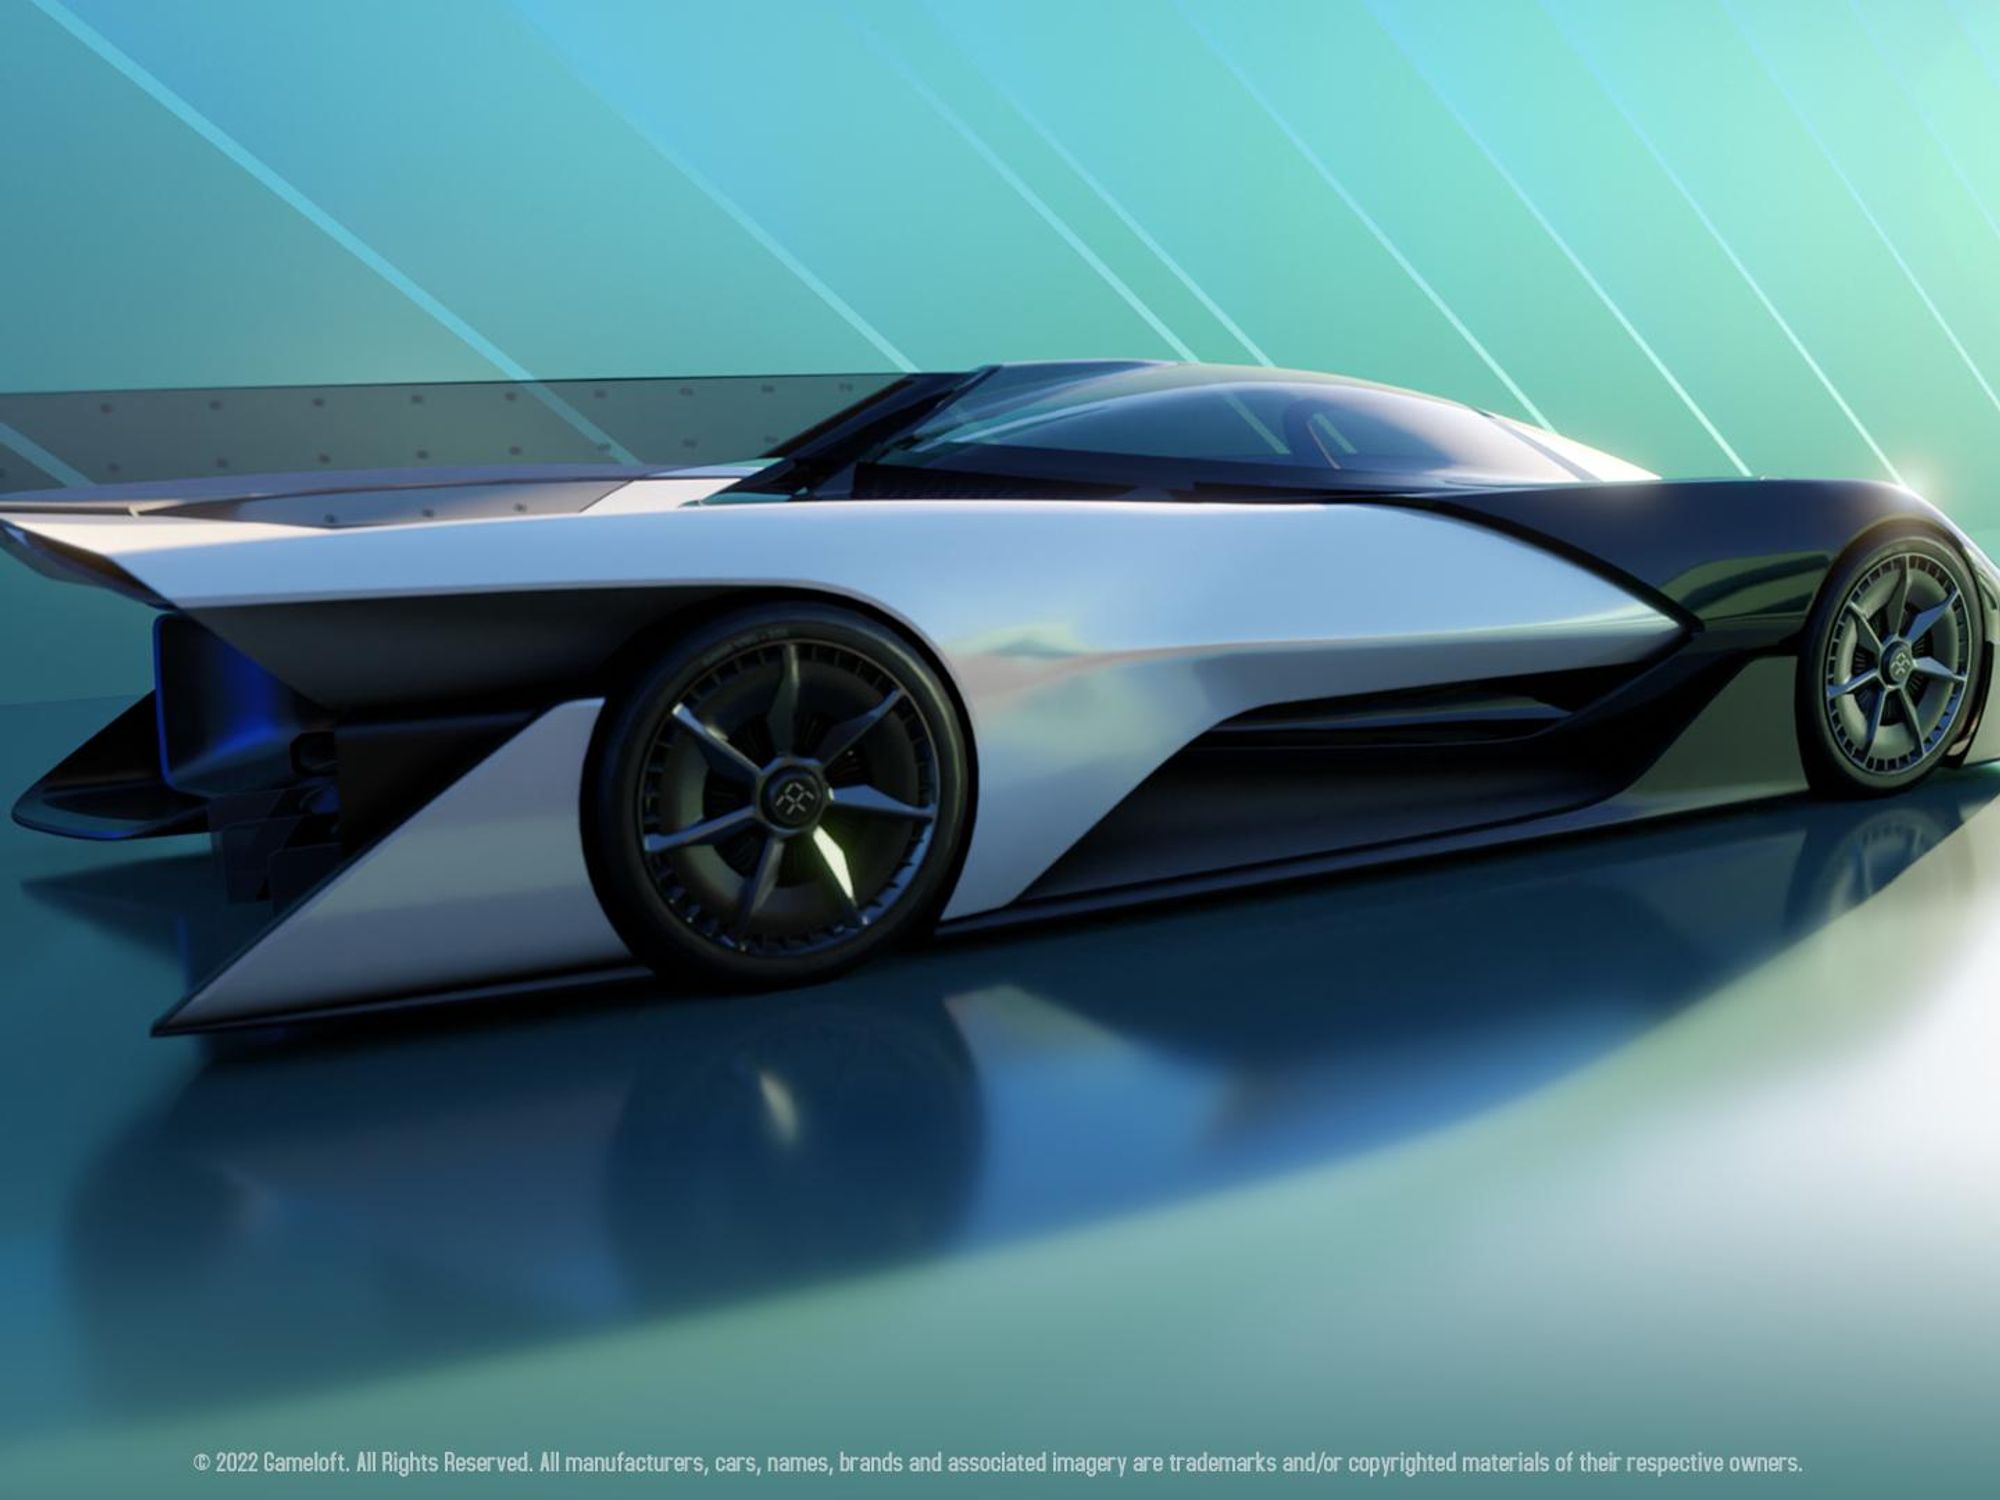 Faraday Future’s Cars Aren’t on the Road Yet – But They’re Coming to Video Games